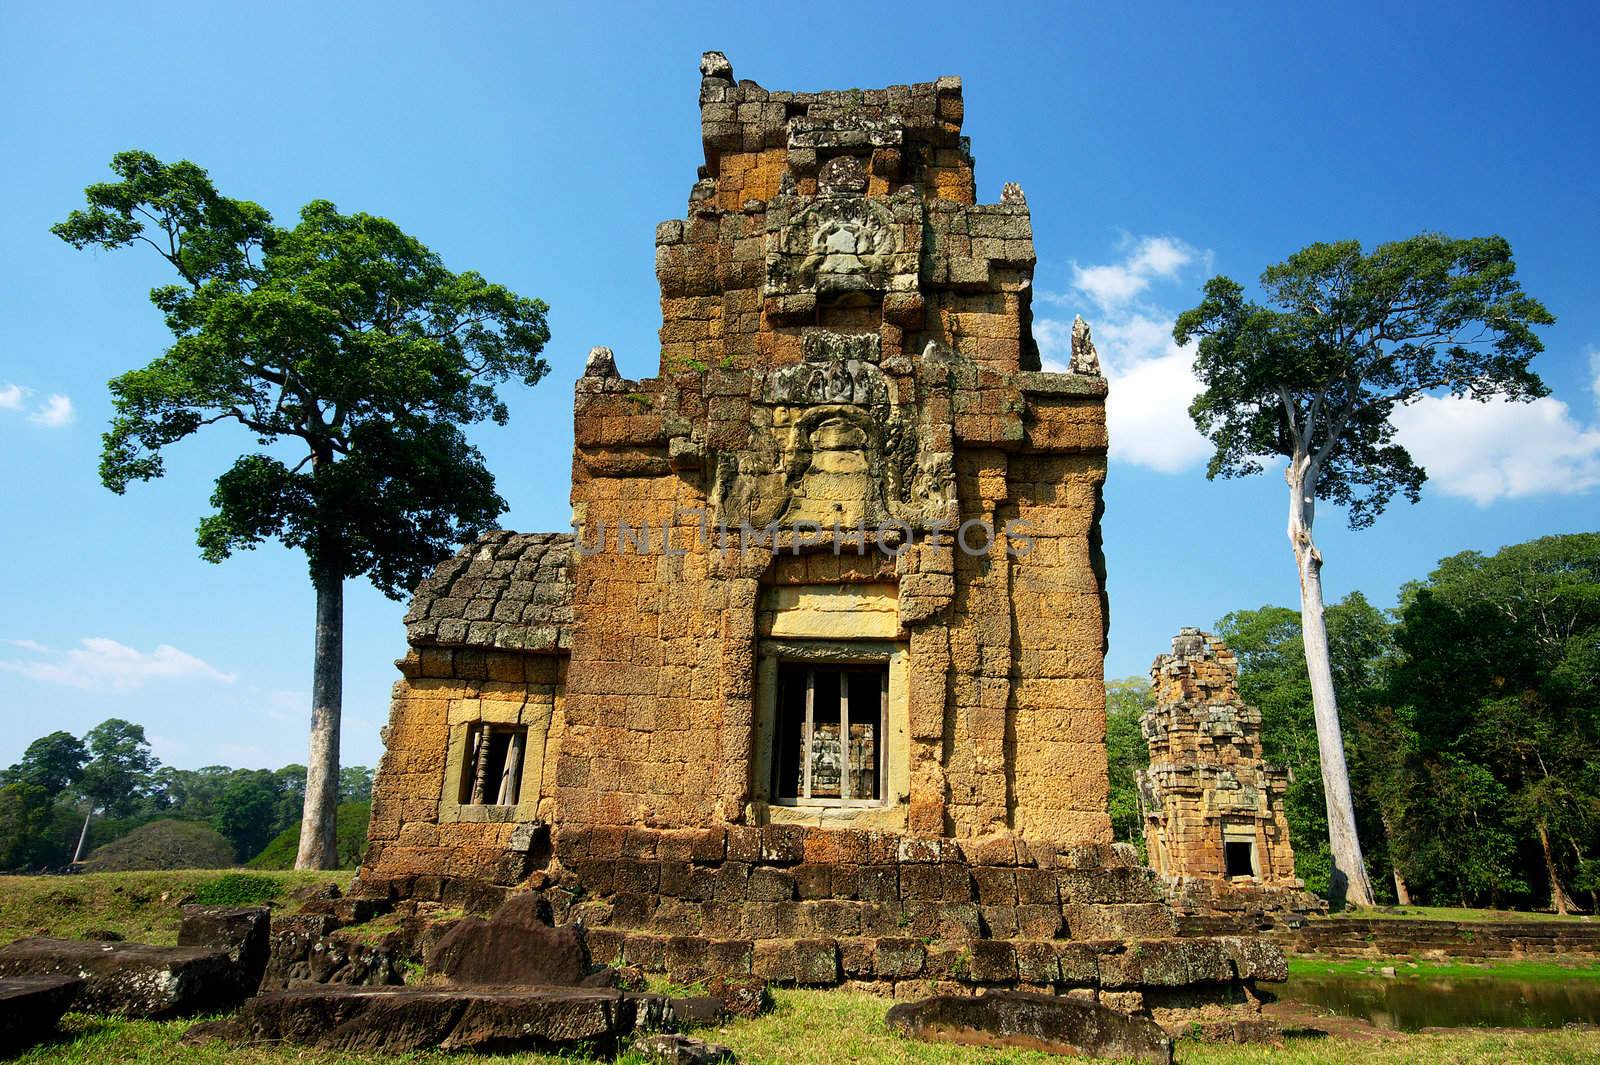 Tower at Angkor Thom, built in the 12th century by king Jayavarman VII, now a crumbling ruin sinking into the marsh. Siem Reap, Cambodia.